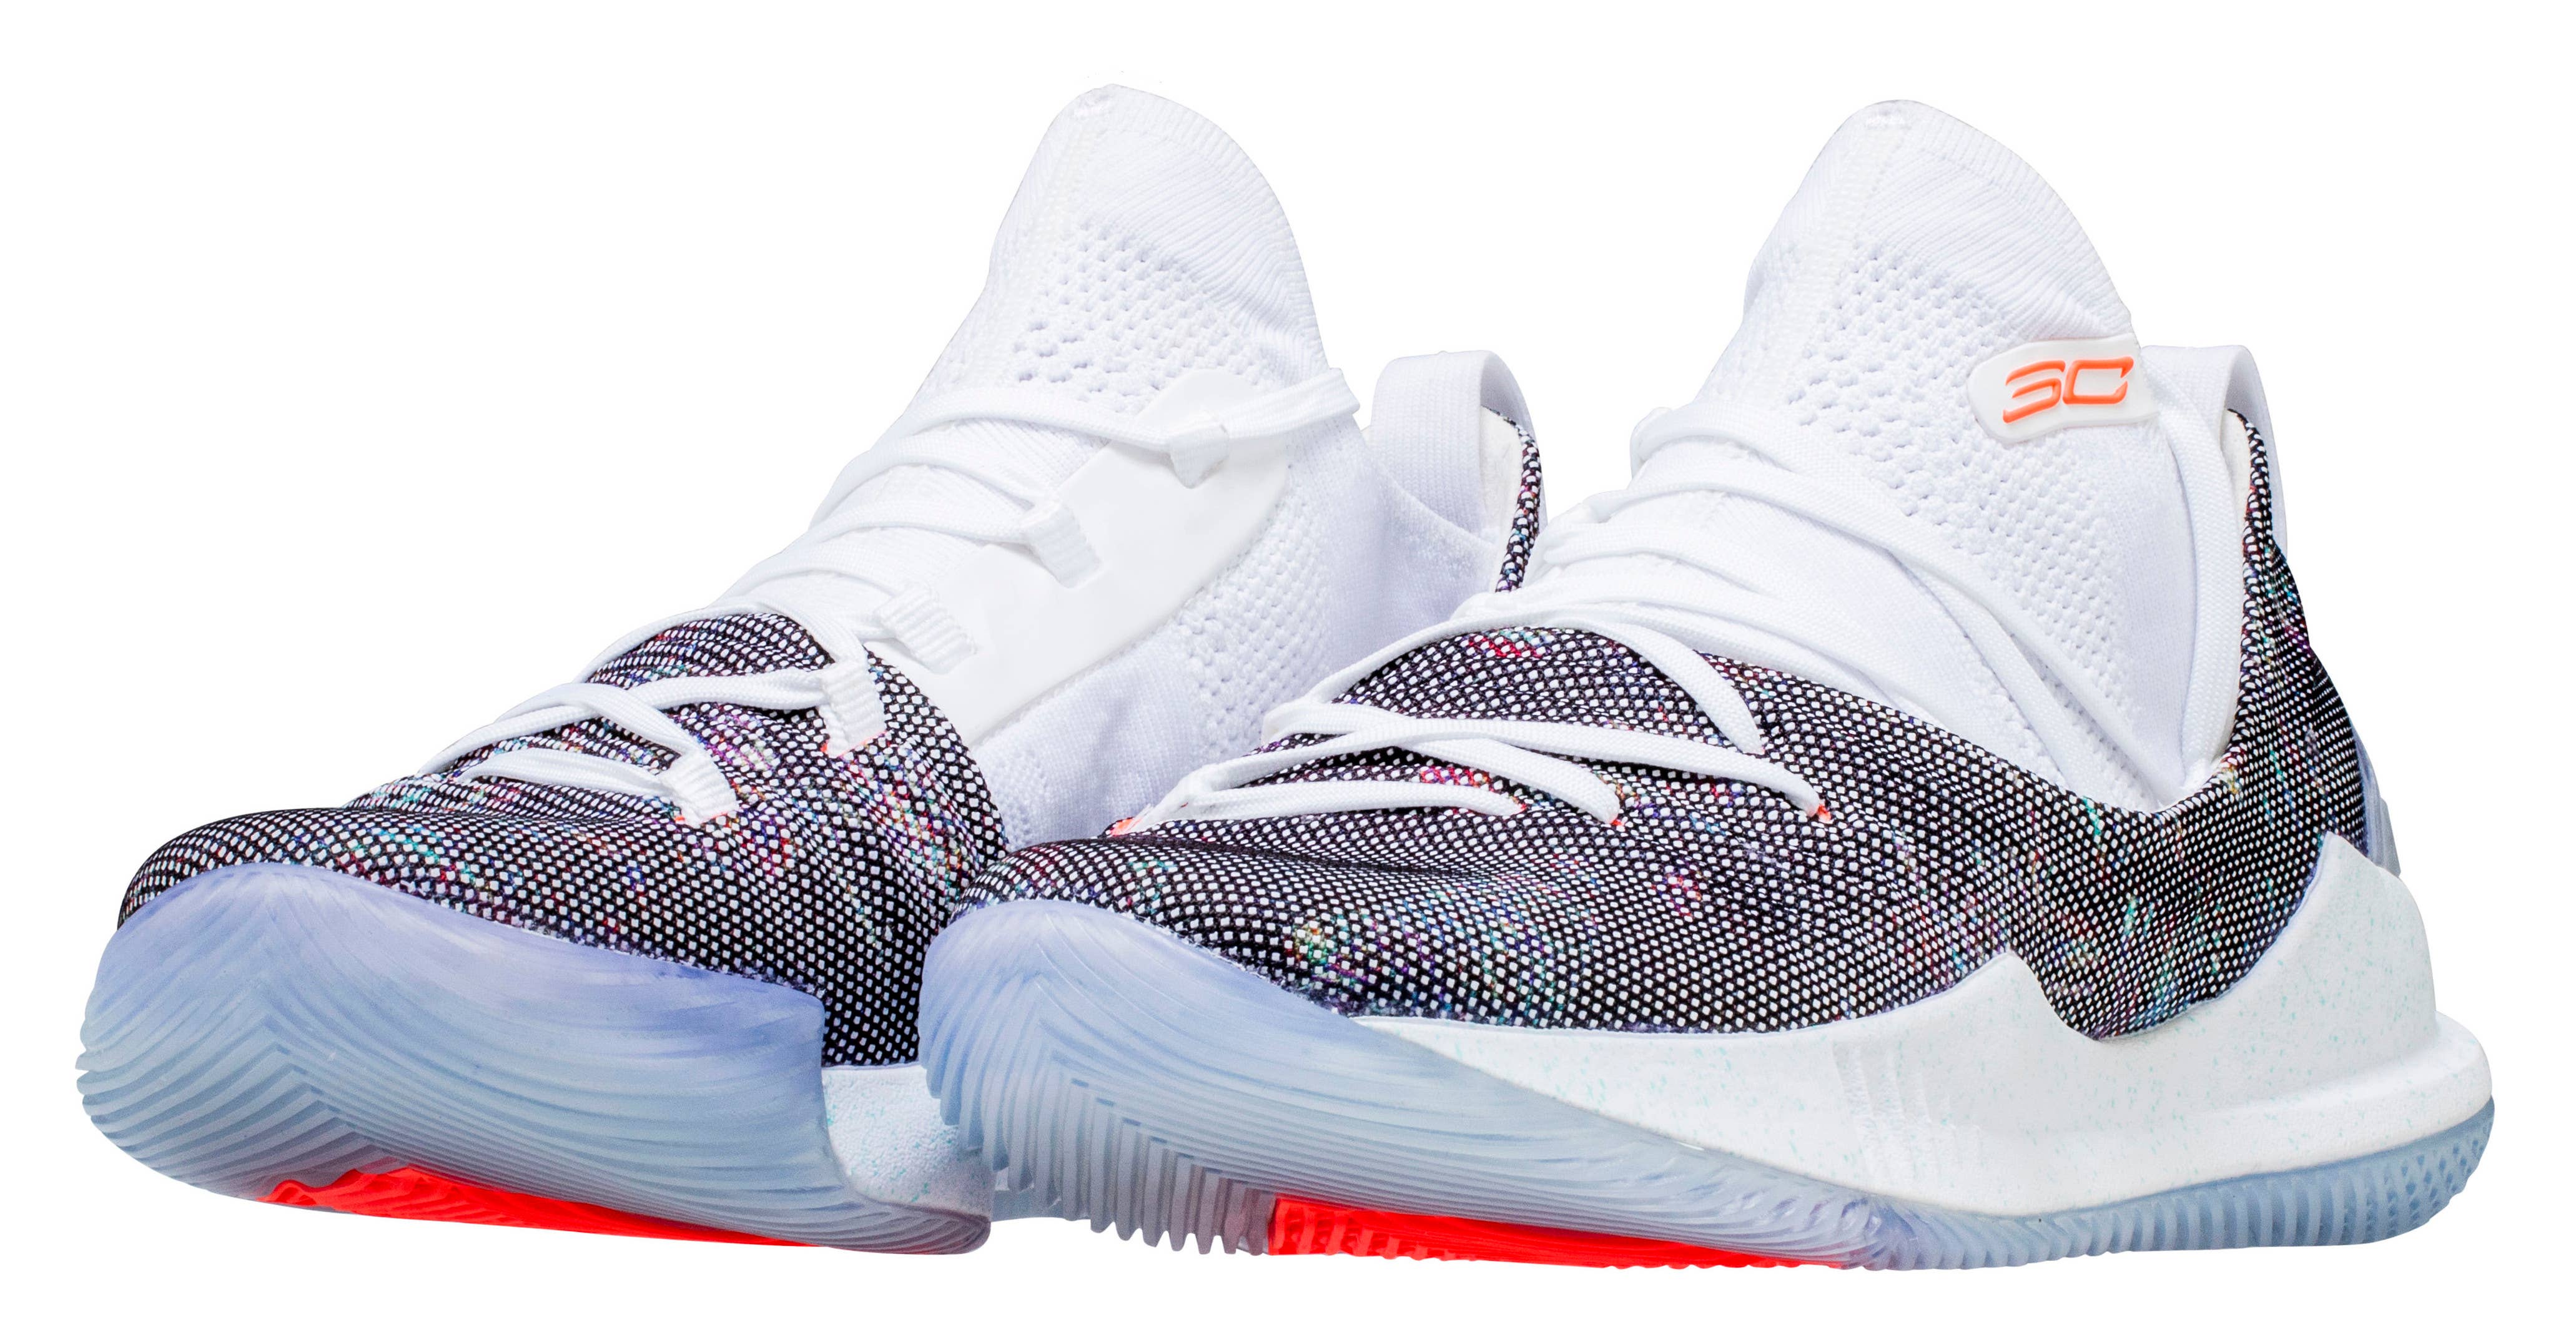 Steph Curry's New Sneakers Early |